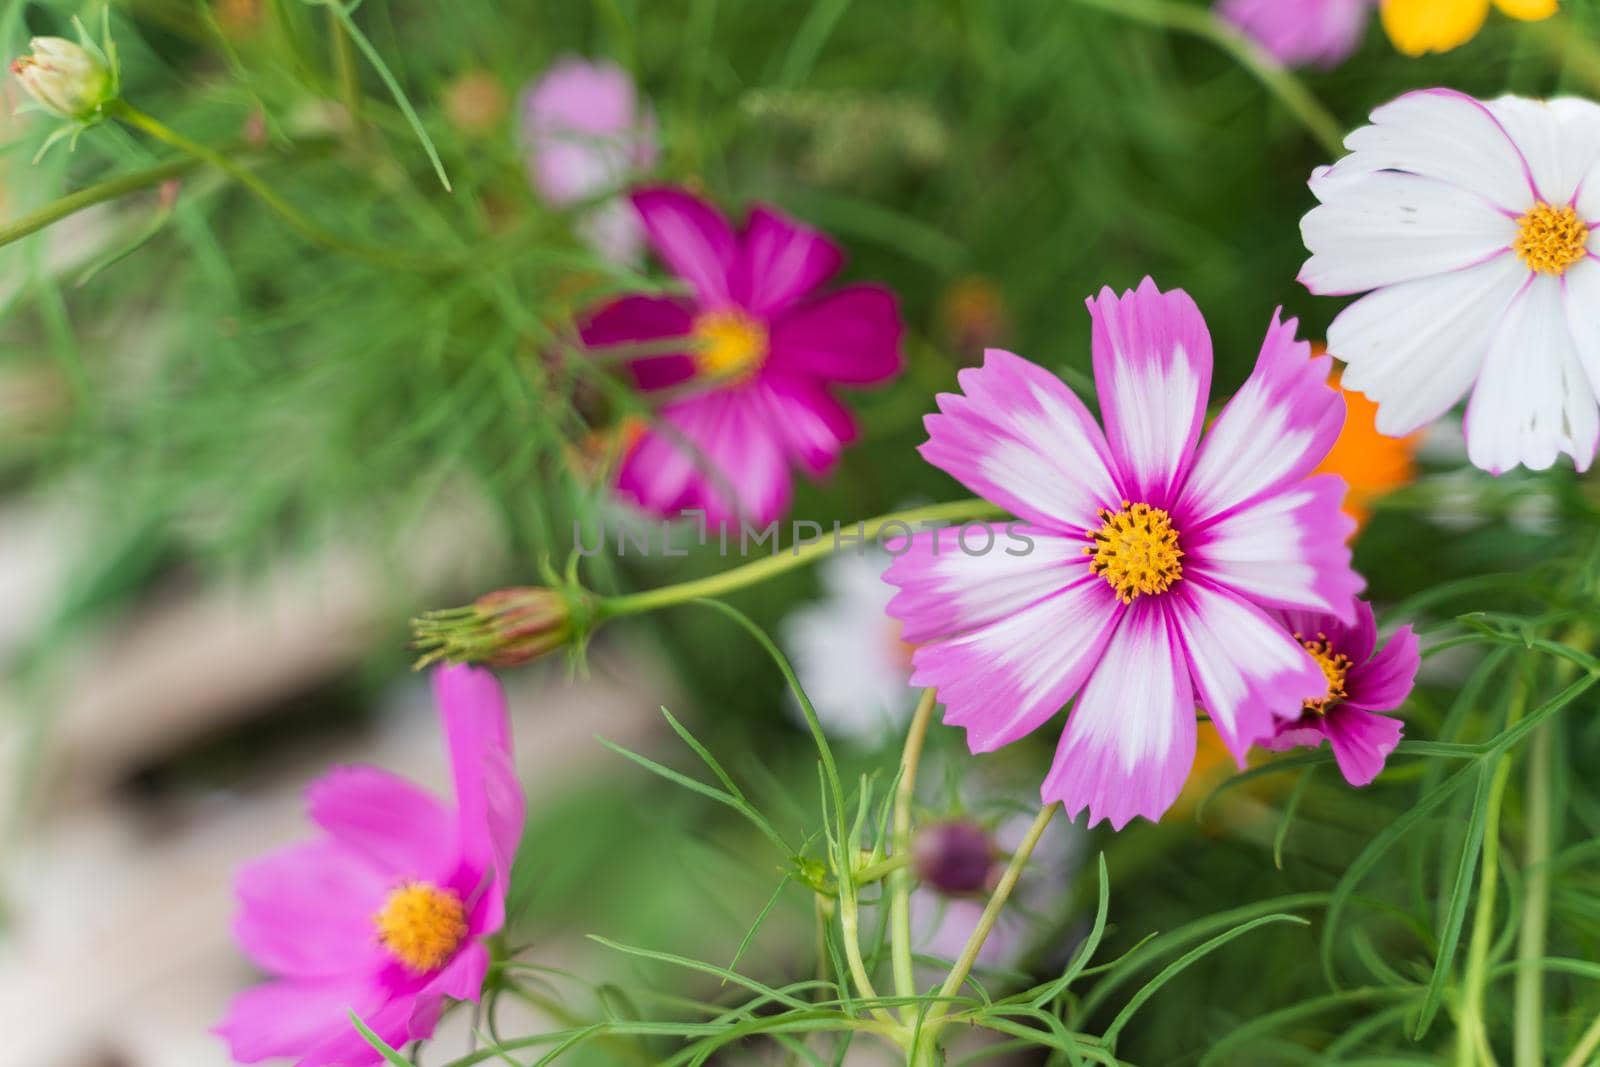 cosmos flowers in the flower garden, nature flowers concept by Wmpix